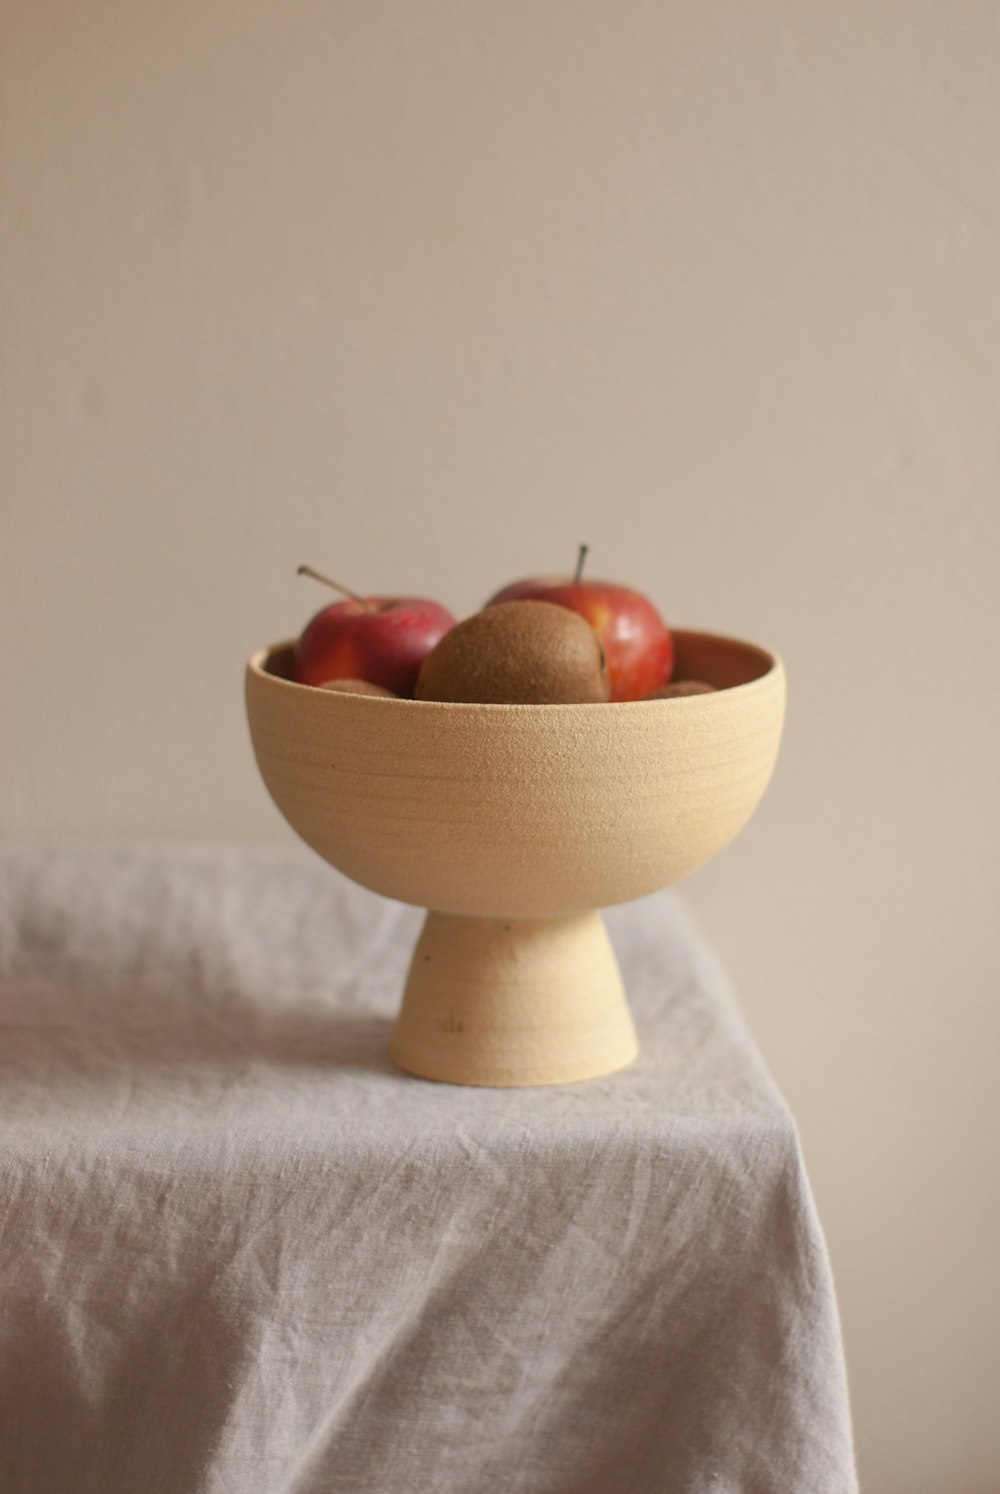 a wooden bowl filled with apples on top of a table